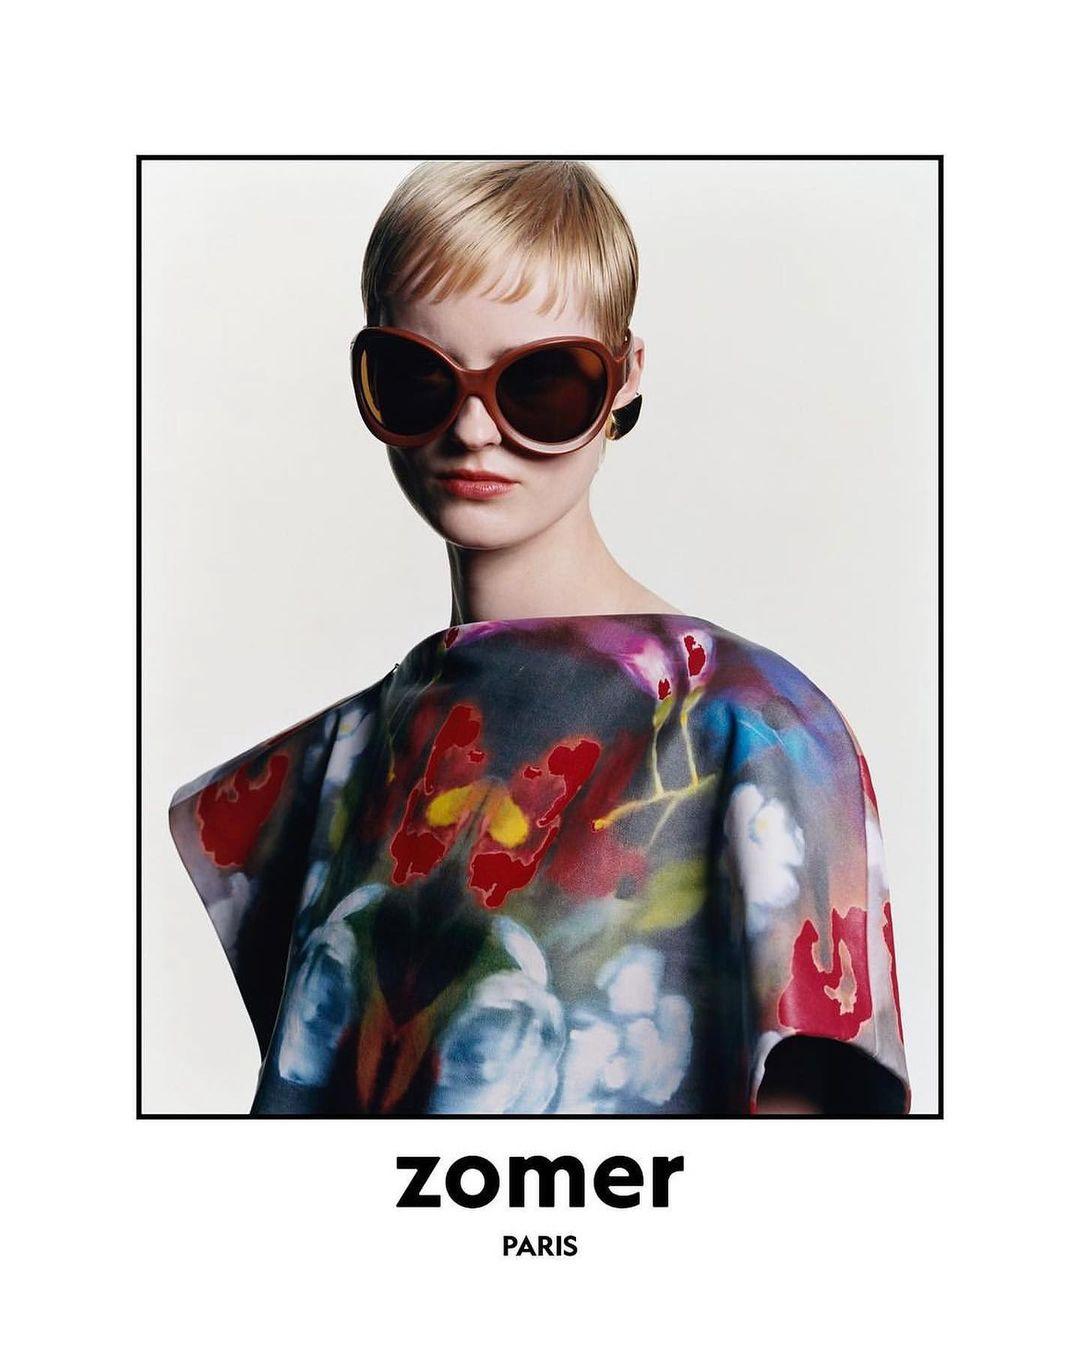 class="content__text"
 “It's Just Kids” – even the world’s biggest fashion stars were babies once. 
These tiny industry insiders are the first to take a look at the @zomer.official ’s collection – a womenswear brand with a strong focus on craftsmanship, the art of dressing, and the joy found in creative expression. 

zomer is a collaborative effort by designer @danial.aitouganov.0.2 , supported by stylist @imruh . 
The brand’s debut show is scheduled on September 26th during Paris fashion week. 

photographer &amp; director @oliverhadleepearch@artpartner 
stylist @imruh 
hair @soichiinagaki@artpatner 
make up @siddharthasimone@streetersagency 
casting @peoplefile 
production @block.productions@rachael.evans_ 
partner @eccoleather 
stills post-production @aly.studio@hammerlab 

video production @50mm.amsterdam@naomyneonijoanny@4everjules__ 
dop @pimpimentel 
creative post production @eliasbrugs 
vfx @semleuven 
model @sterre.h@premiermodels 

special thanks @mojospoodleclub@bambi_paradise